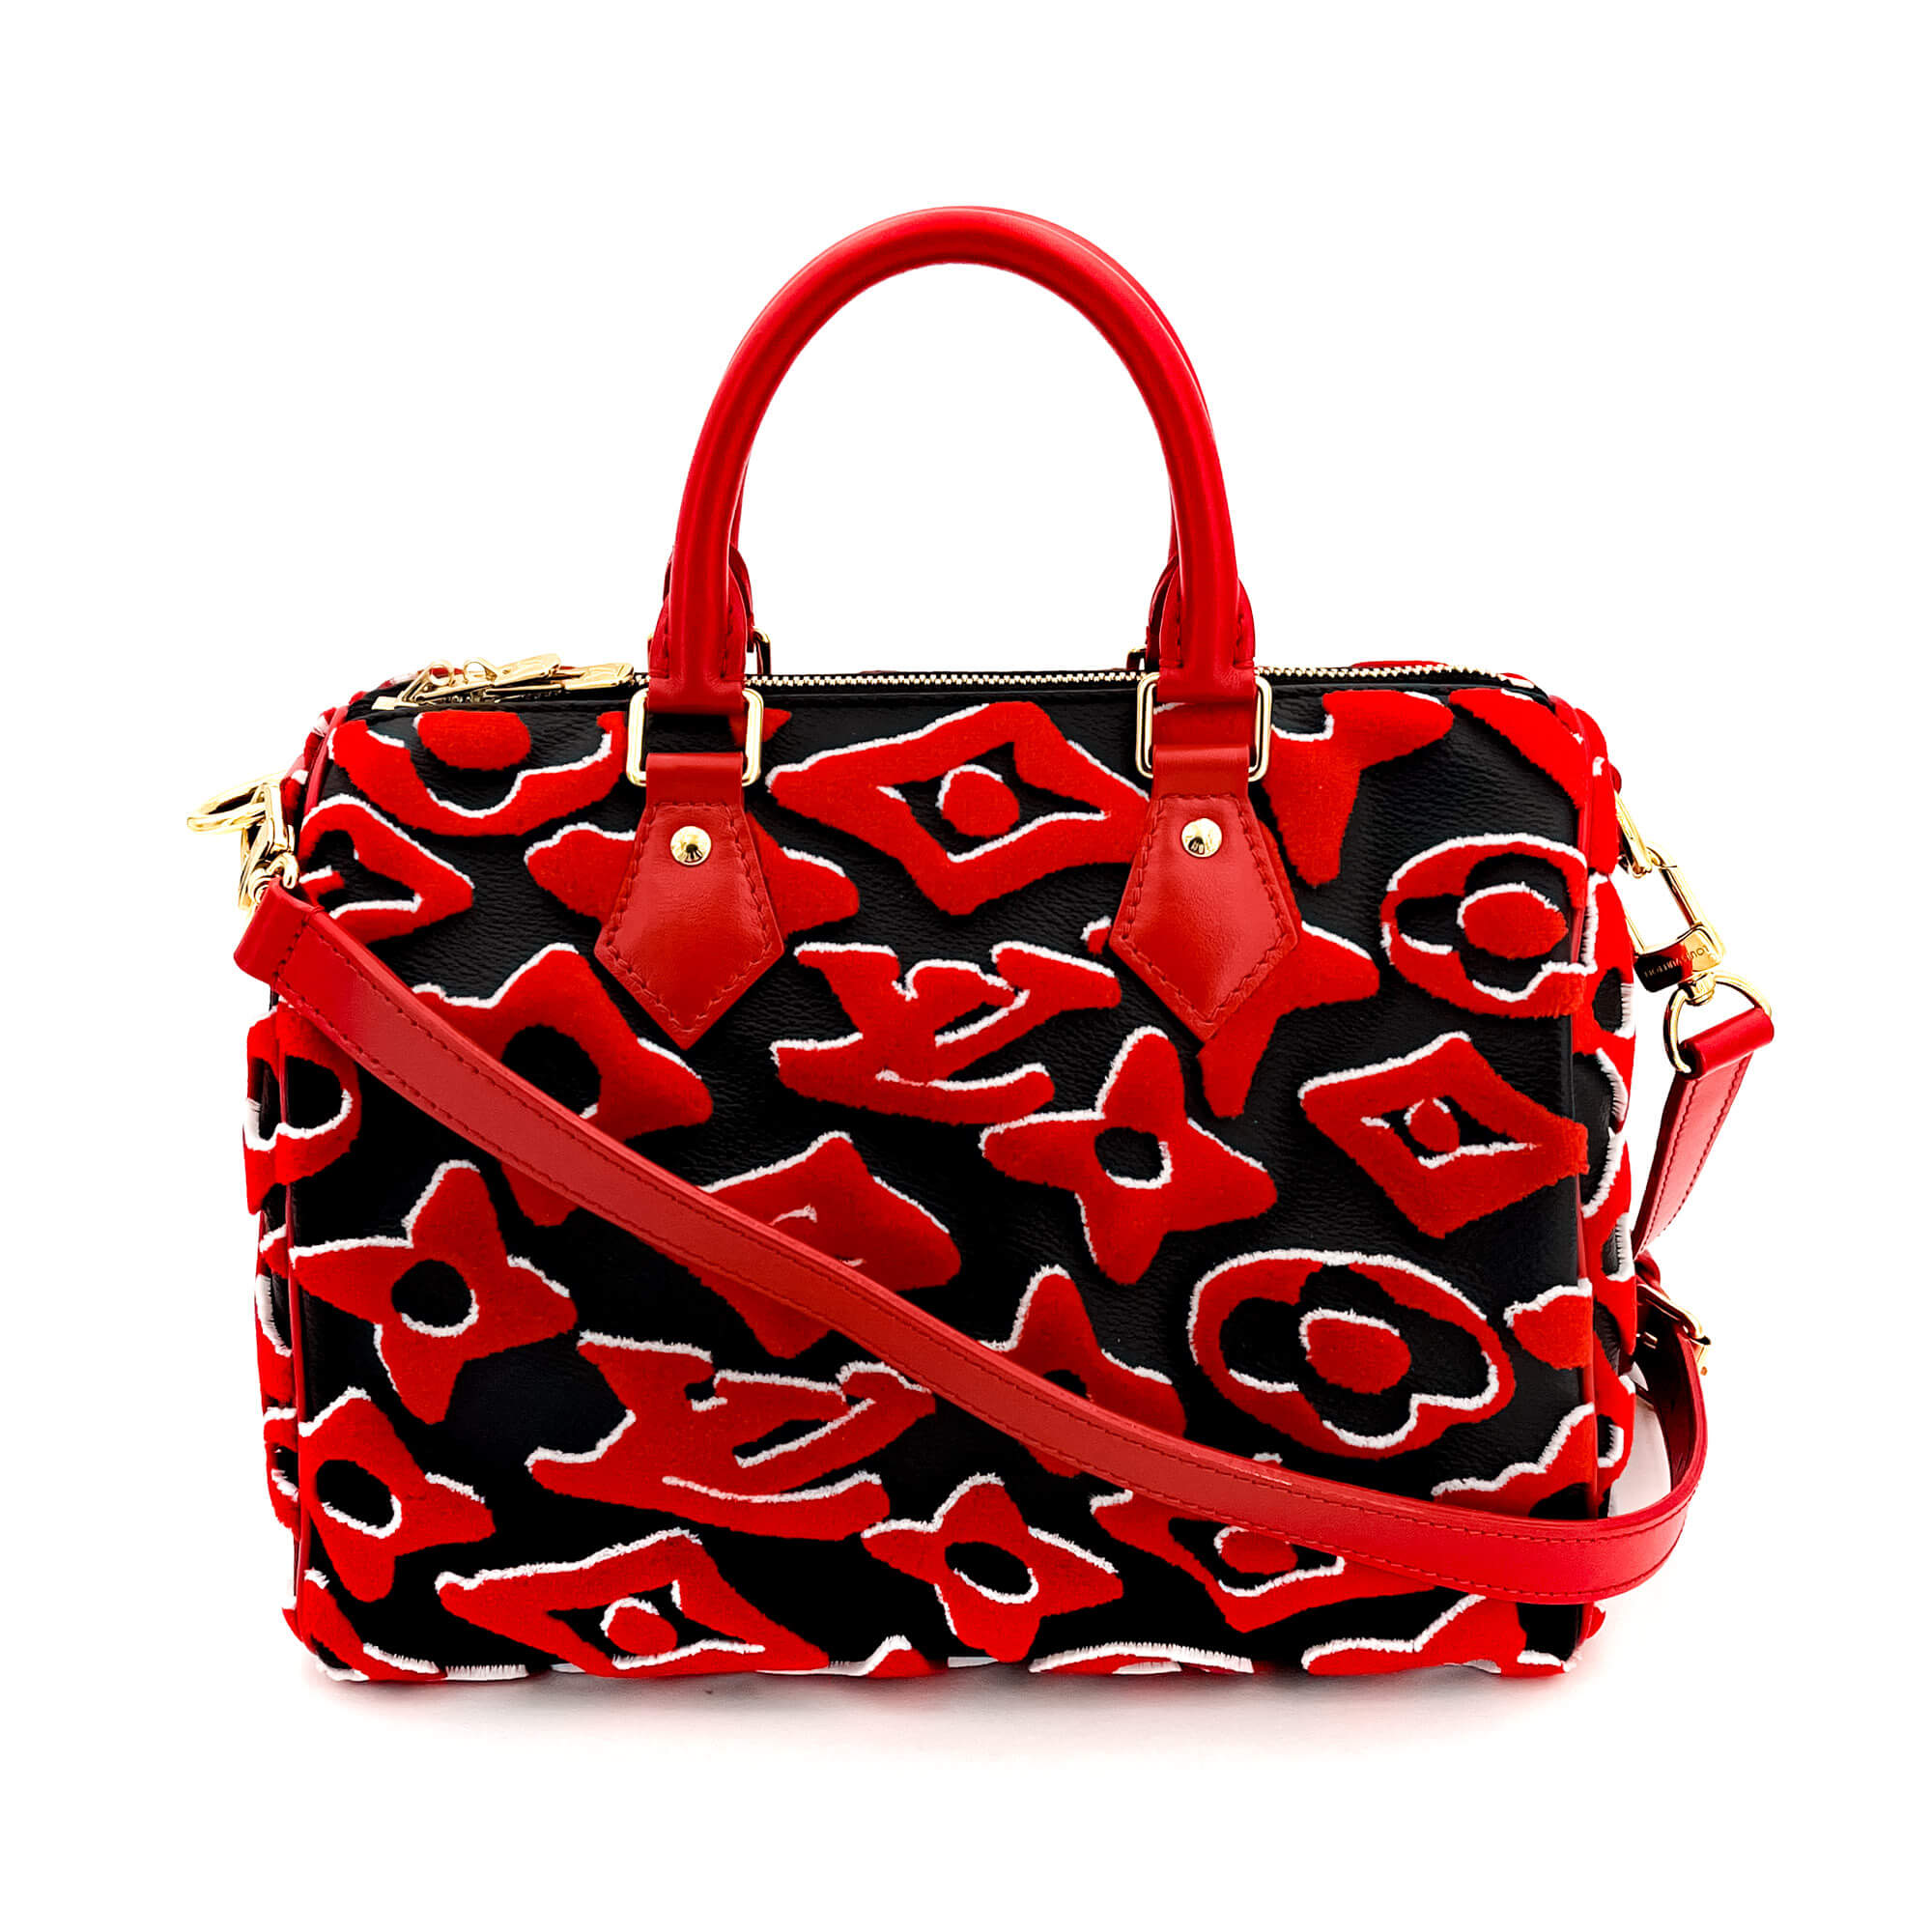 Speedy 25 Bicolore bag in red epi leather Louis Vuitton - Second